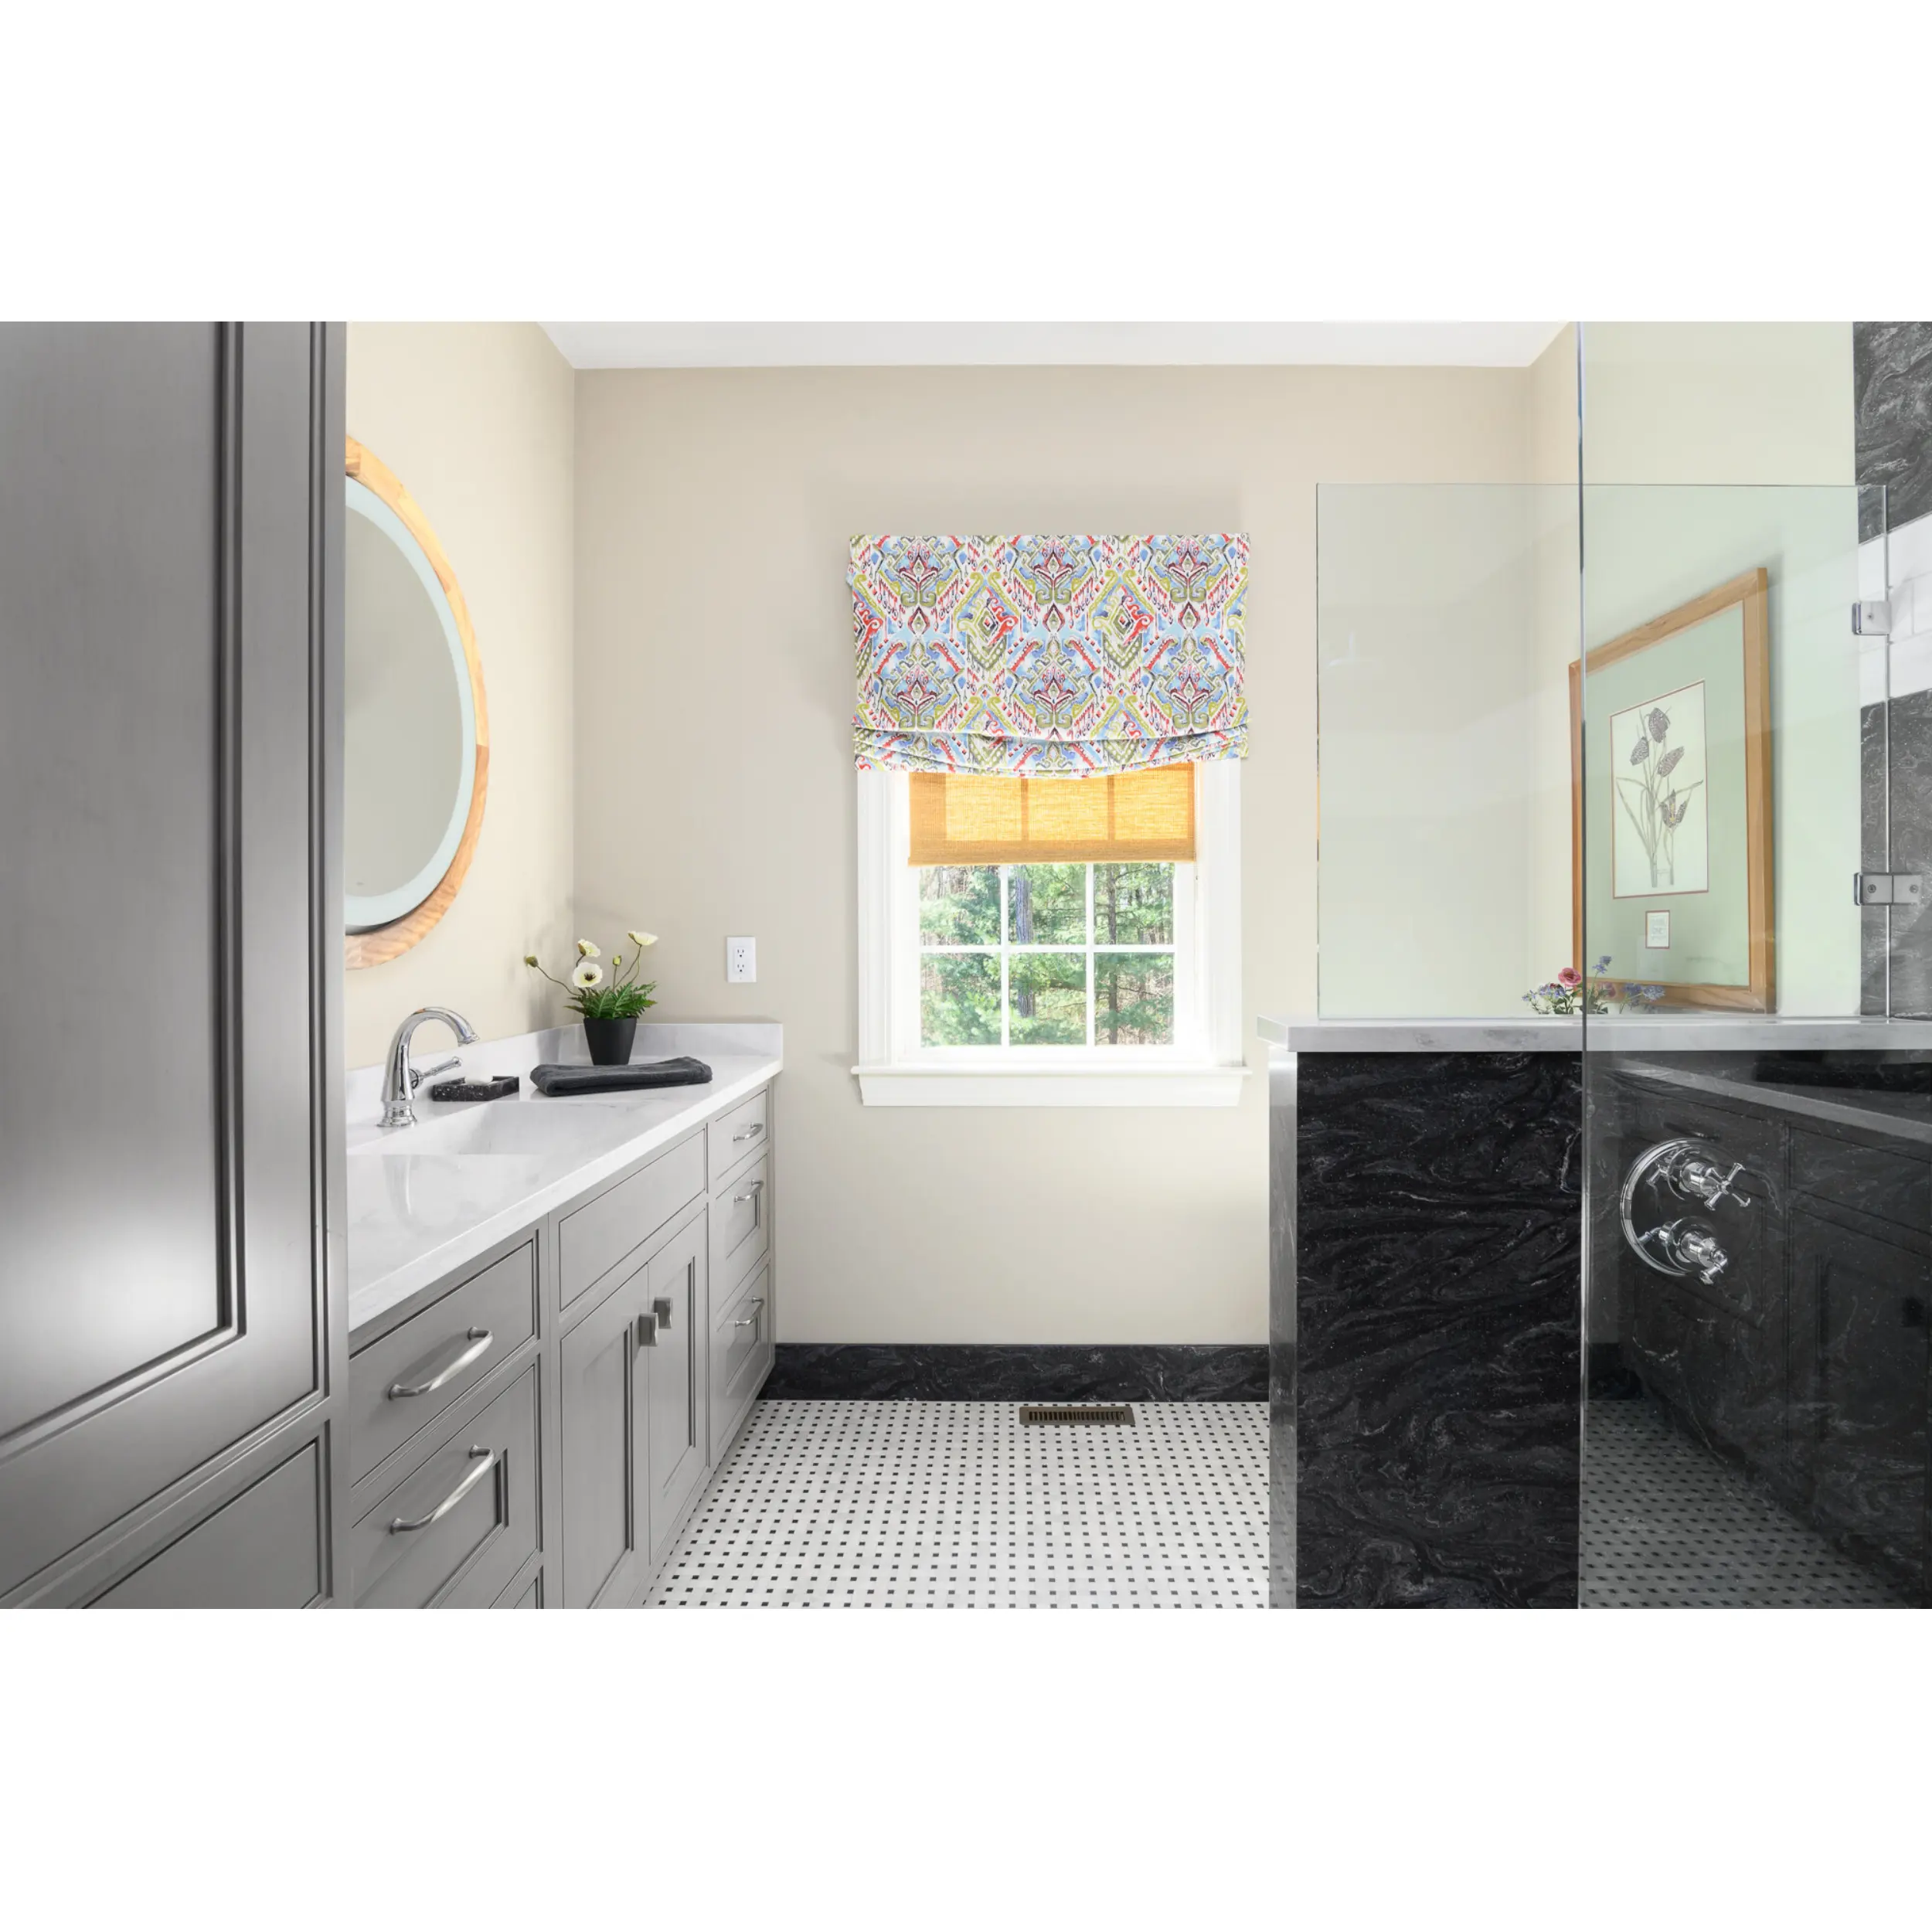 2023 Skyline American Classical Style Matte Grey Bathroom Vanity with Circular Mirror and Marble wall